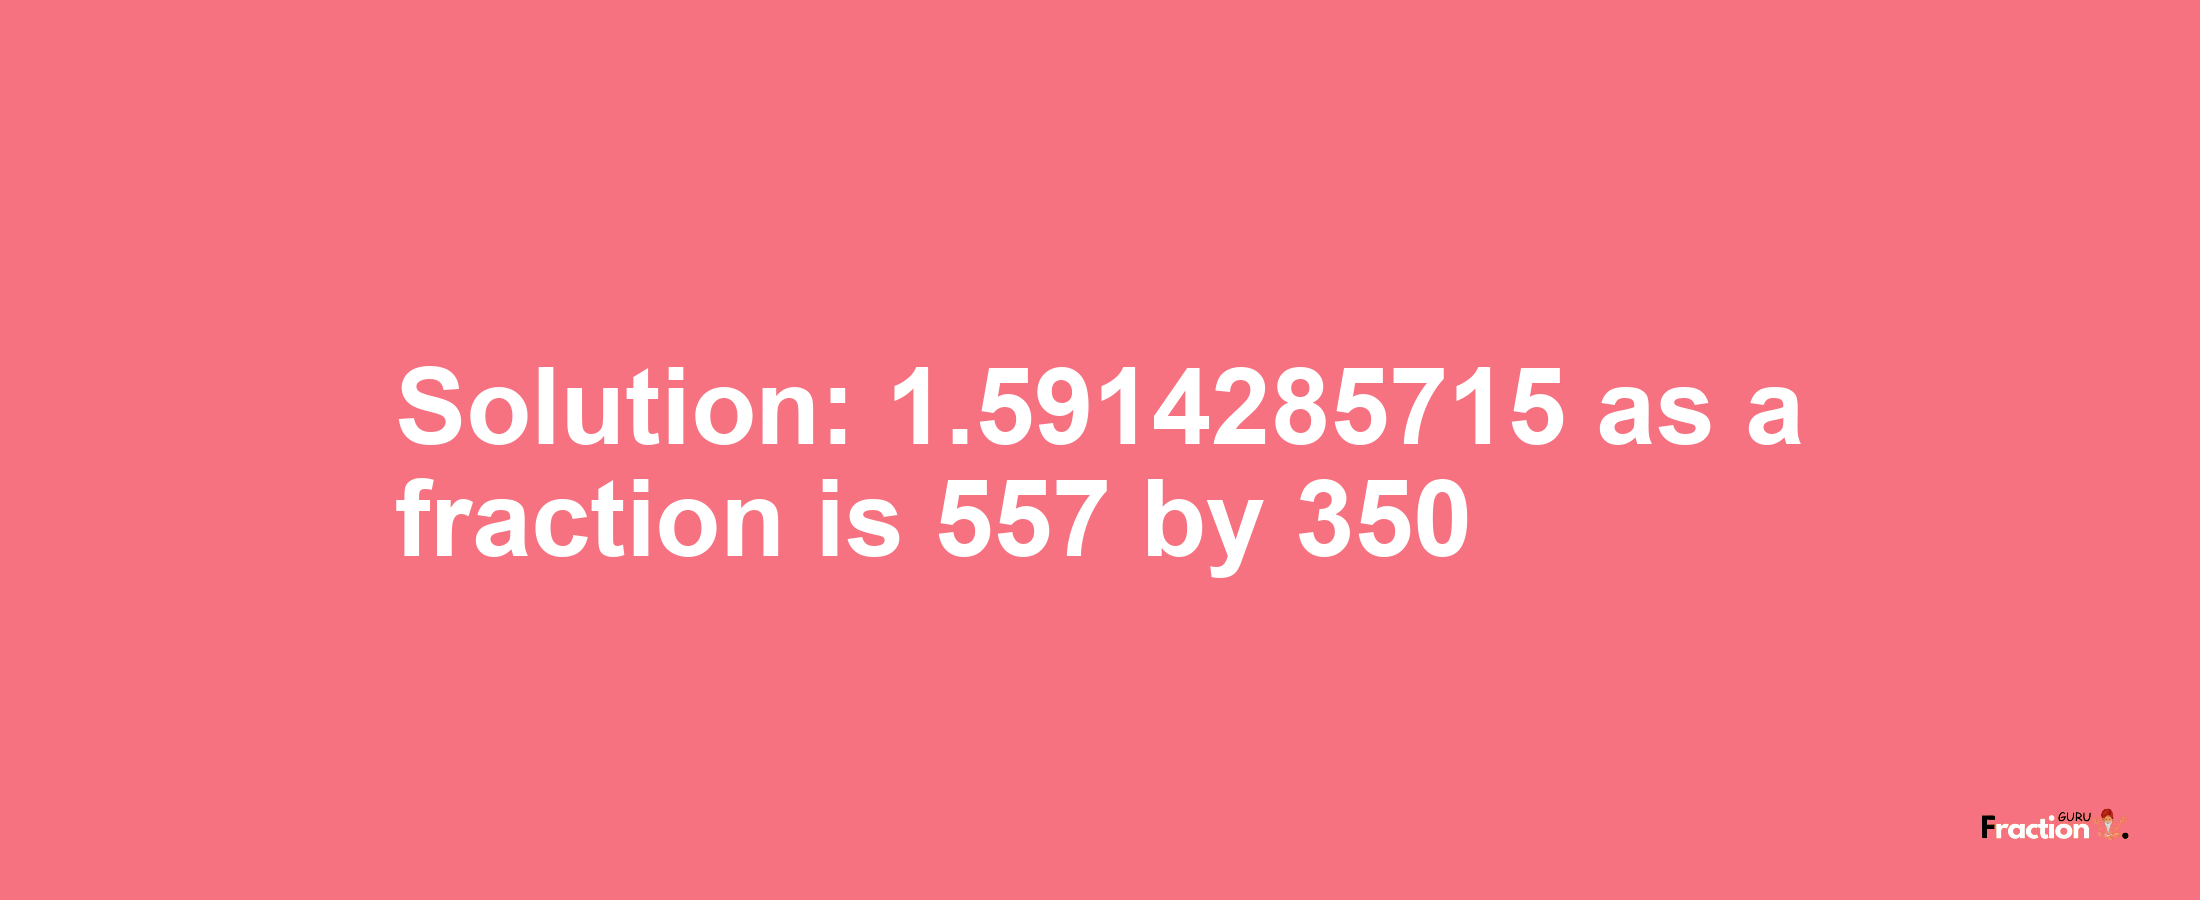 Solution:1.5914285715 as a fraction is 557/350